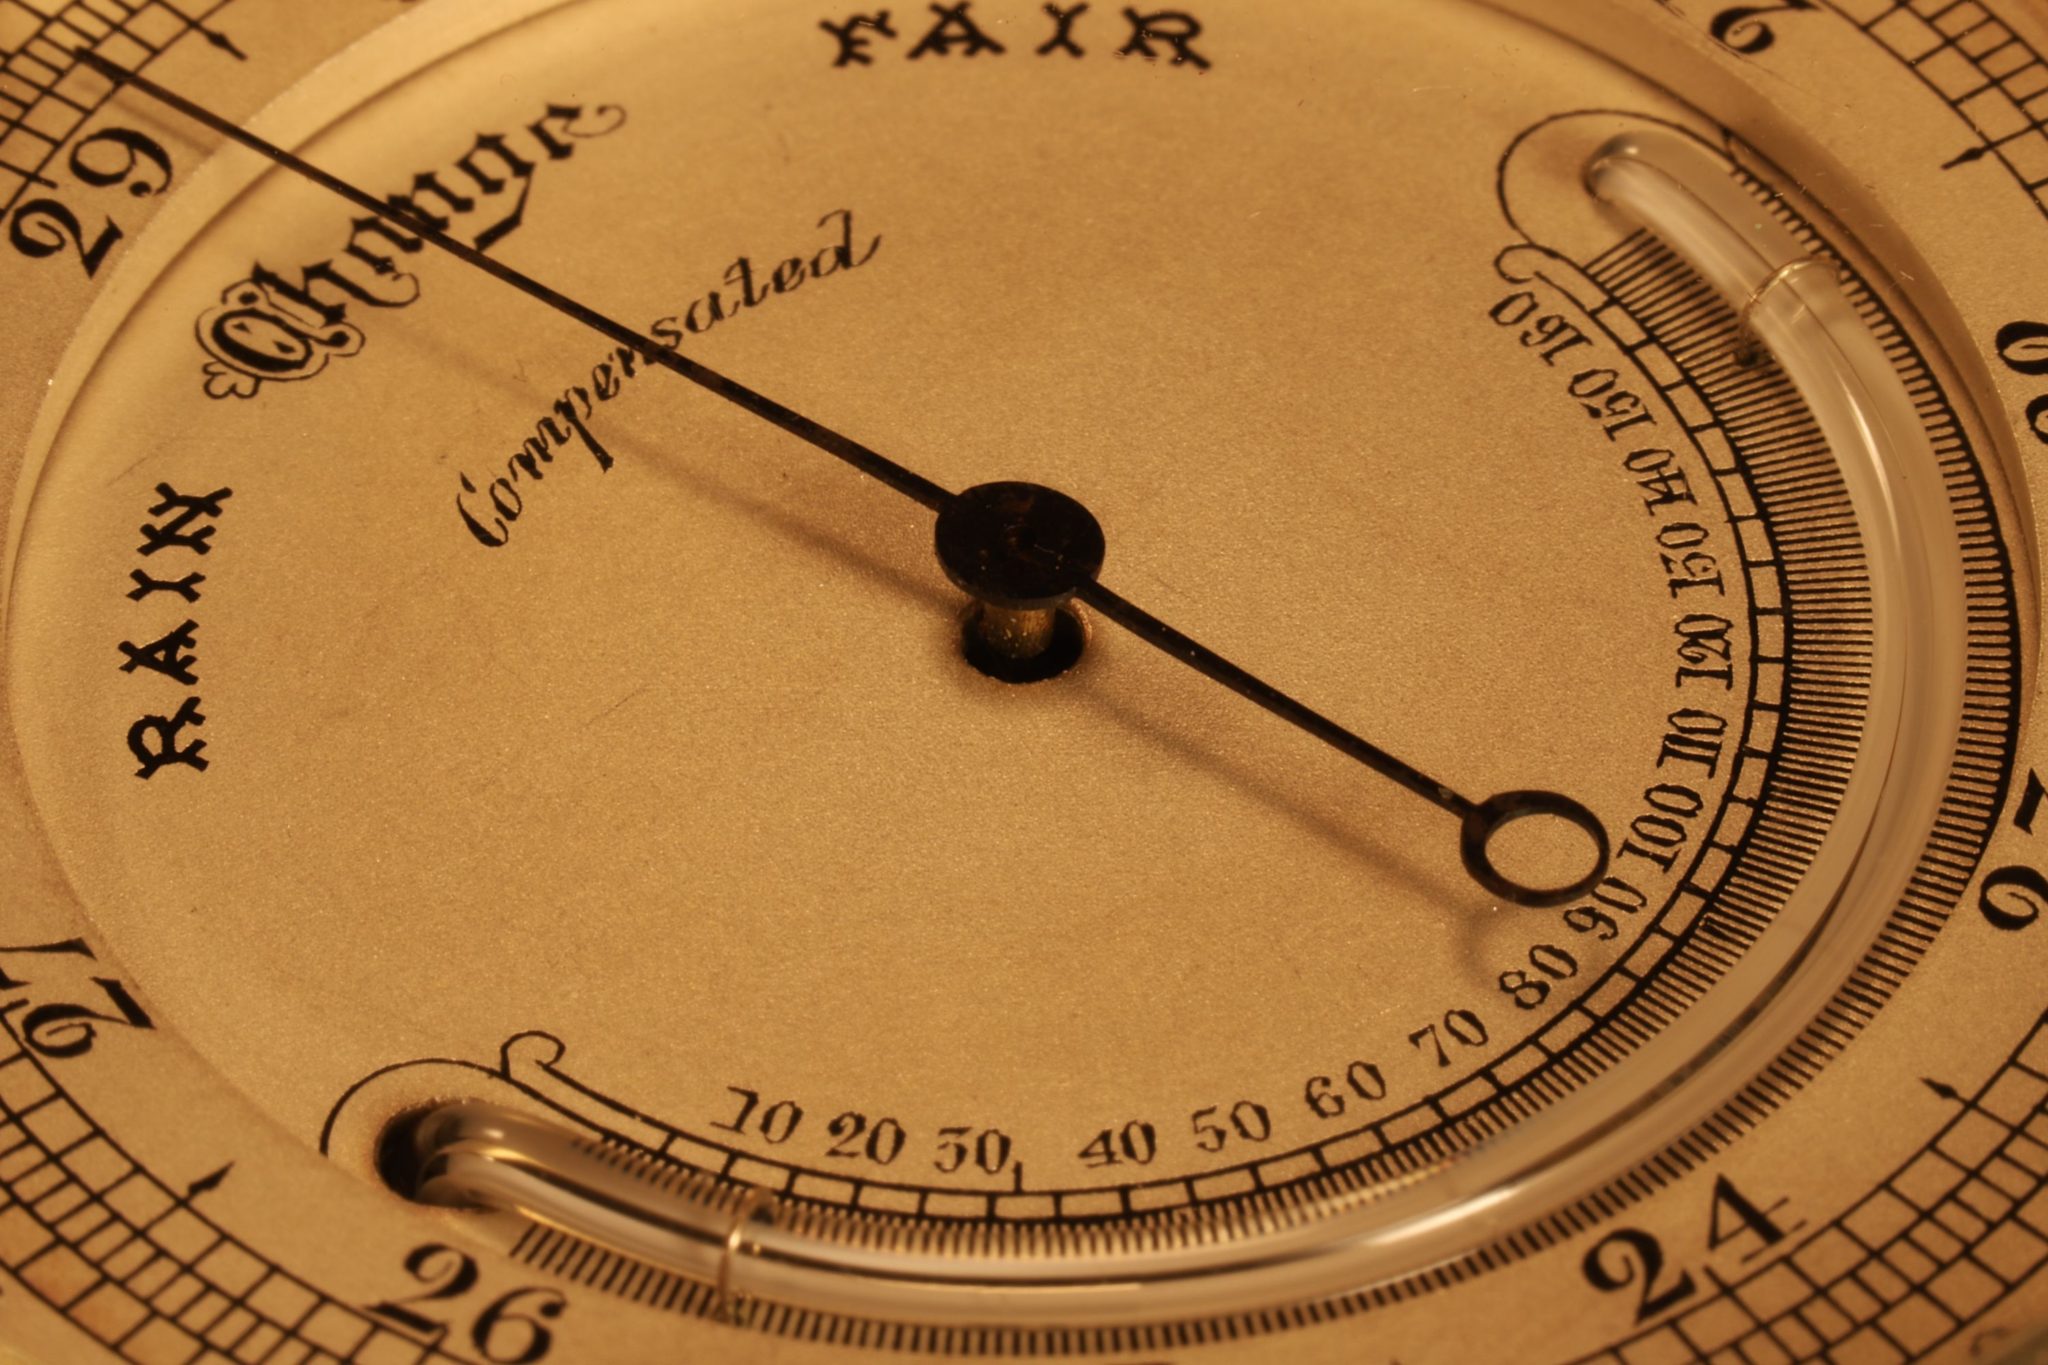 Image of Ross Pocket Barometer with Thermometer c1880